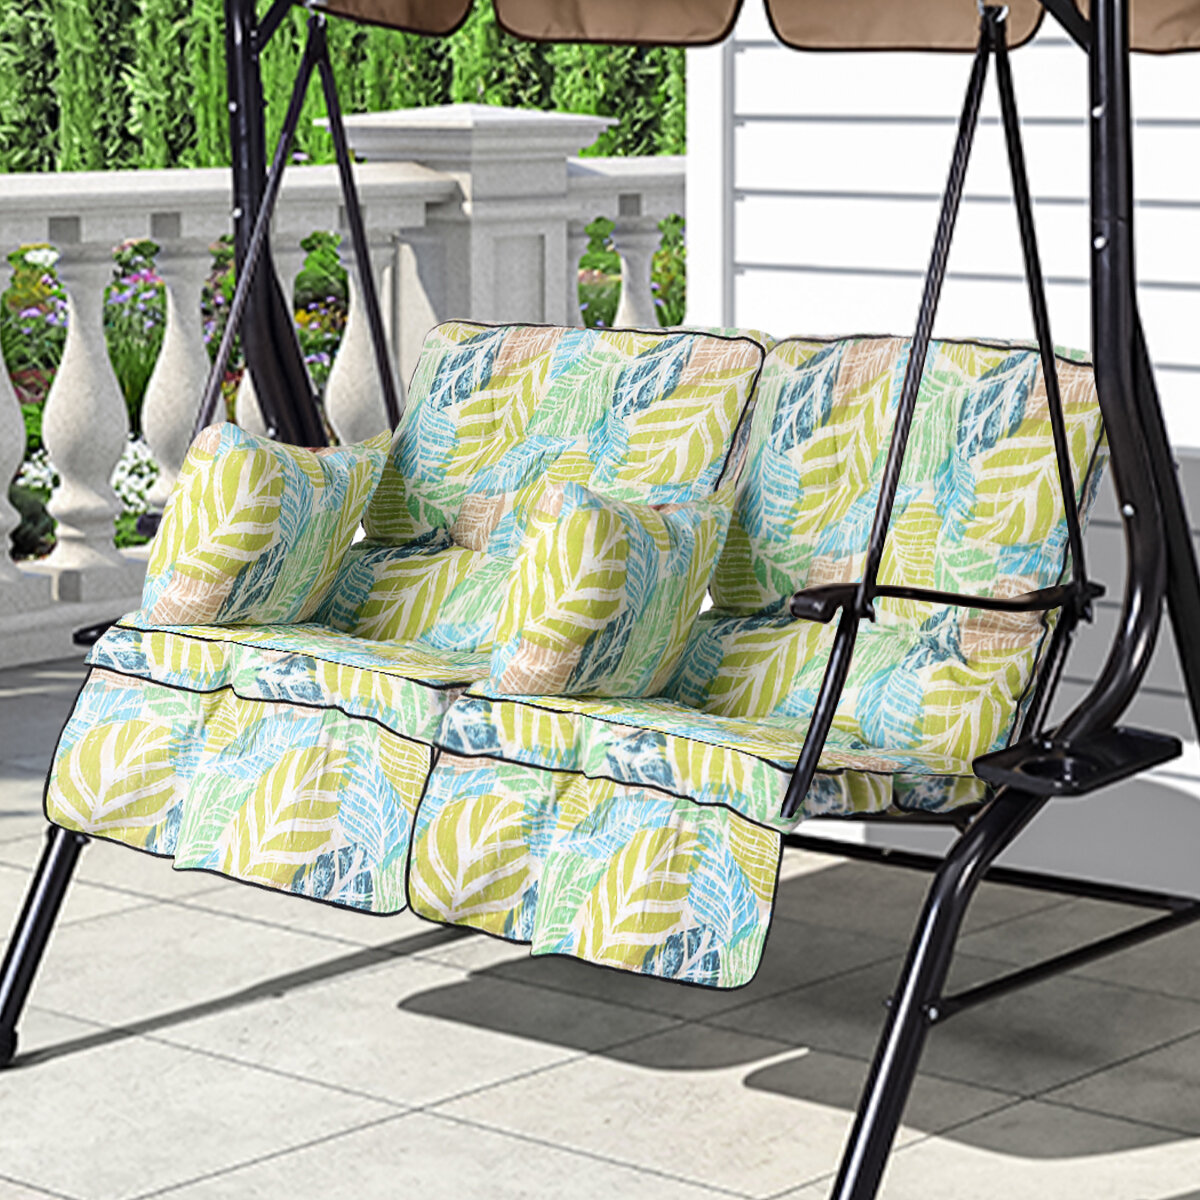 Image of Outdoor Swing Chair Patio Seat Swing Cushion Replacement with Armrest Pillow Classic Garden Swing Seat Chair Cushion